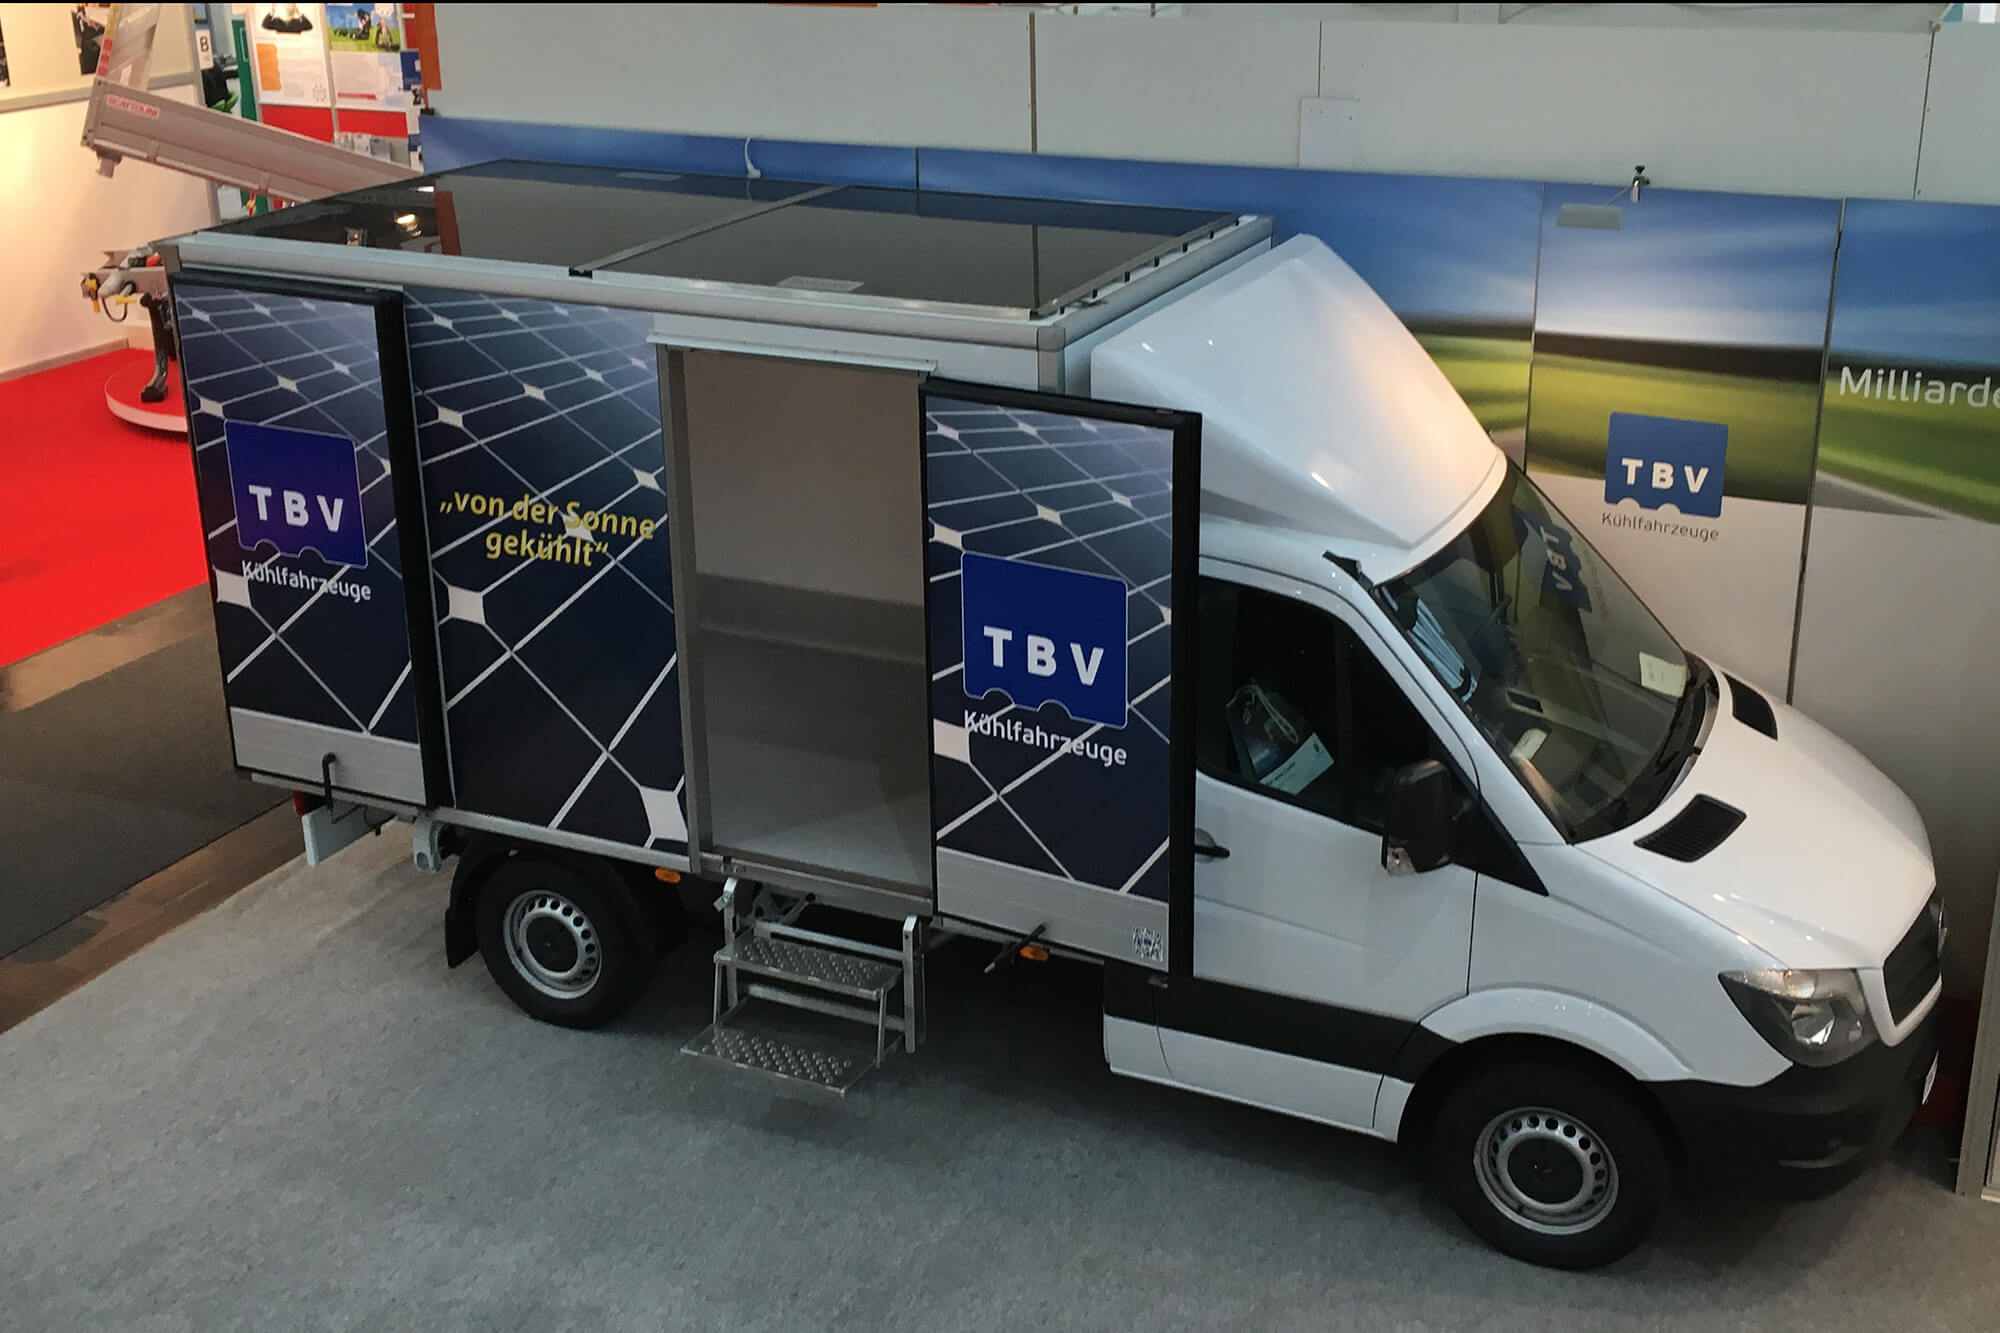 Refrigerated van from the TBV company